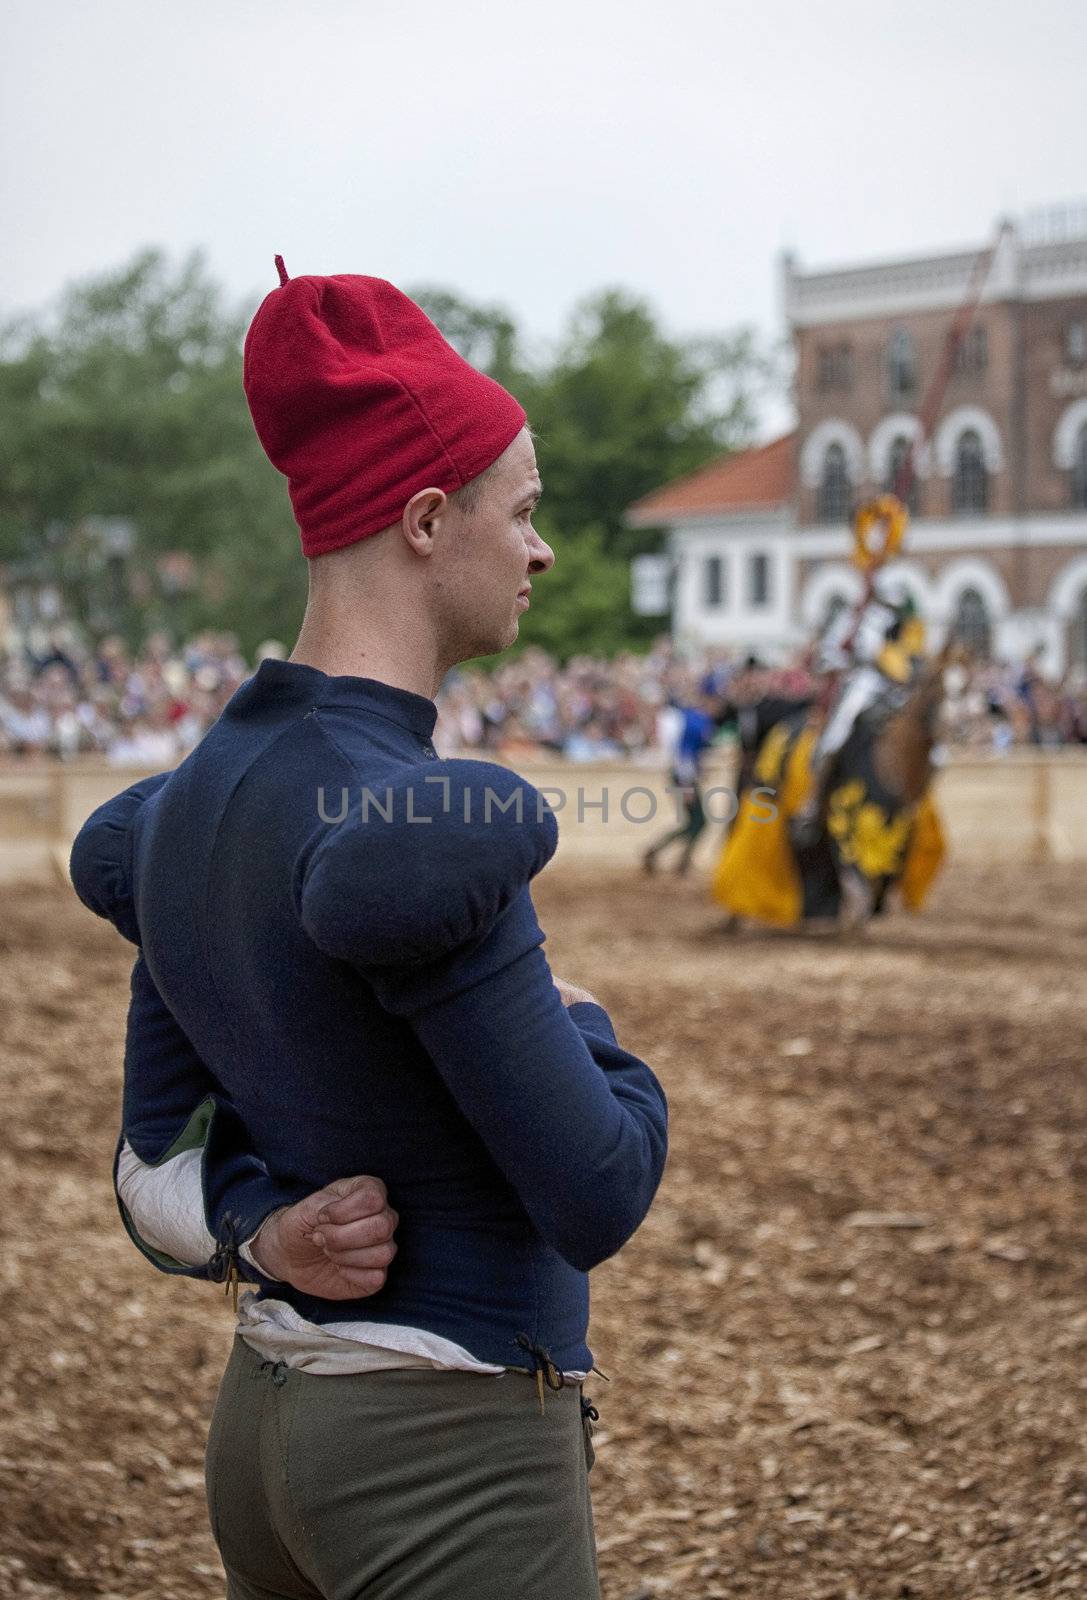 NYBORG DENMARK, JUNE 30, 2012: A squire looking at his master fighting in the  2012 Knights tournament of Nyborg, Denmark in front of the old town hall of Nyborg.